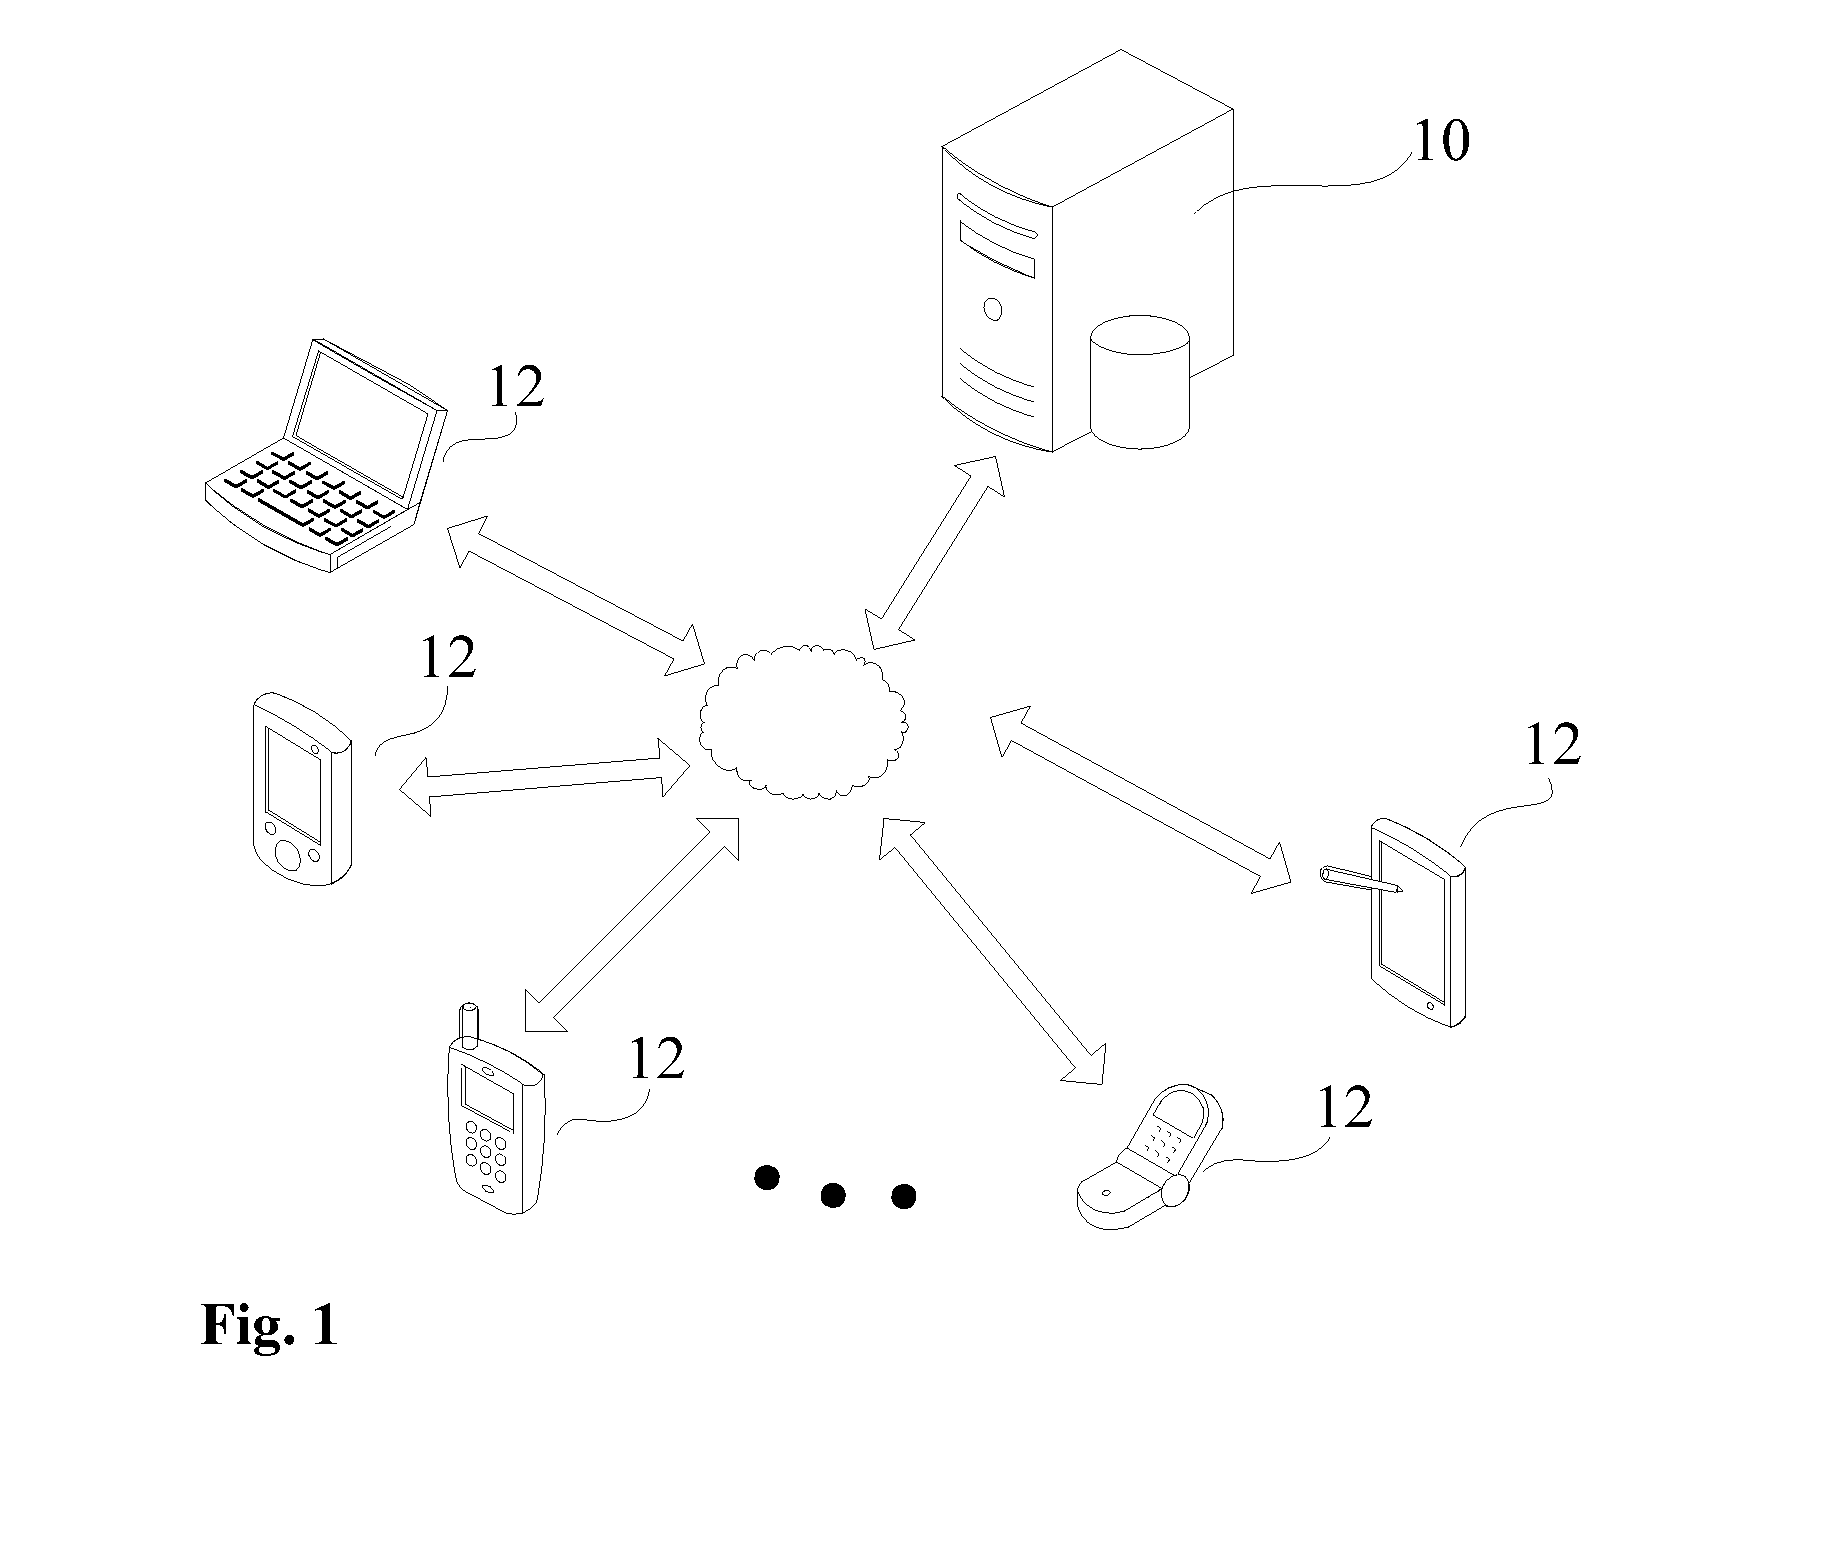 Method and system integrating geographical location information and bluetooth technology for relaying electronic business card